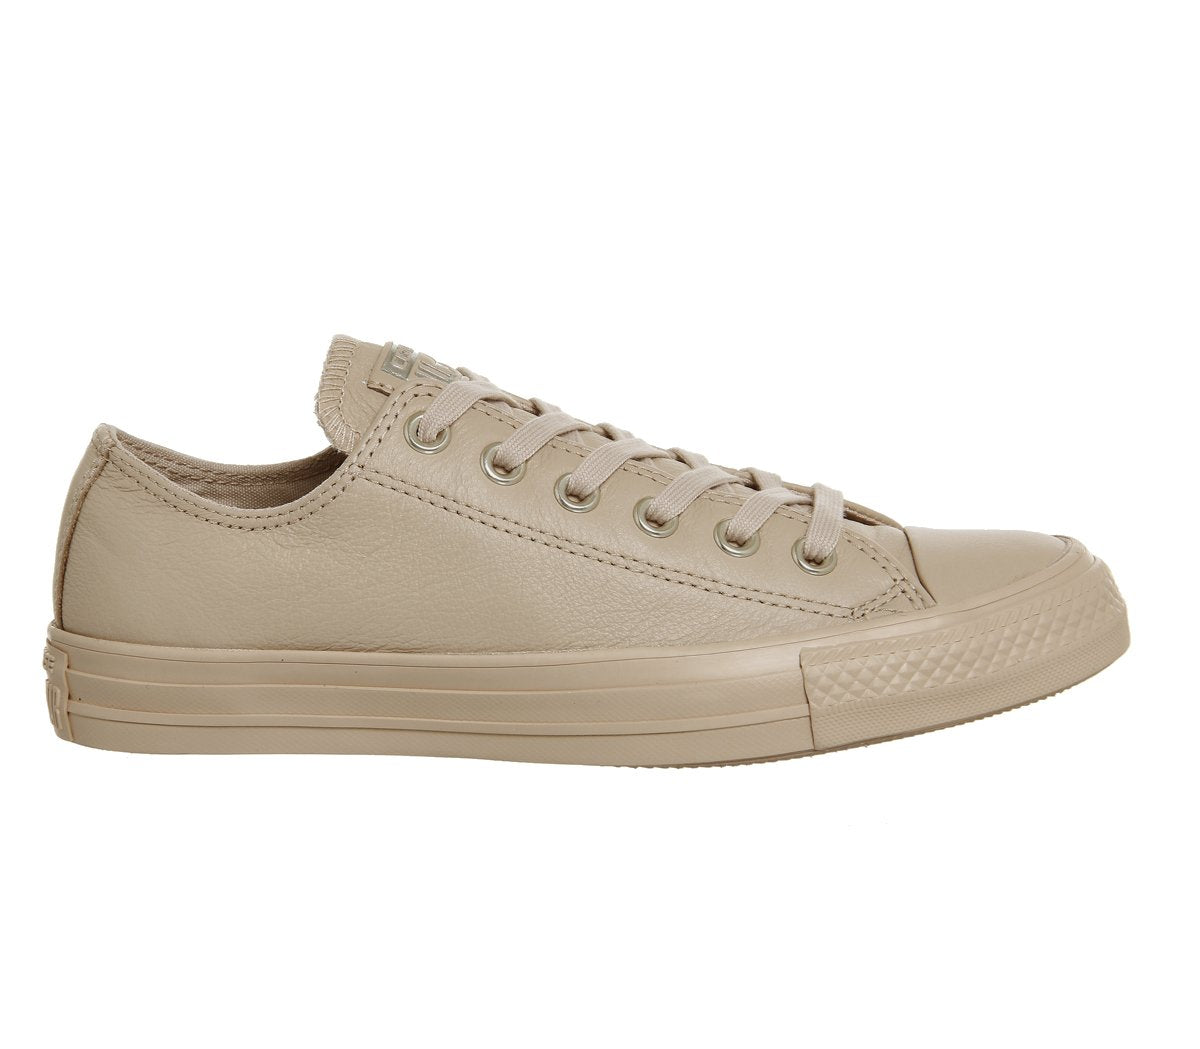 Converse All Star Low Leather Ivory Cream Light Gold Exclusive